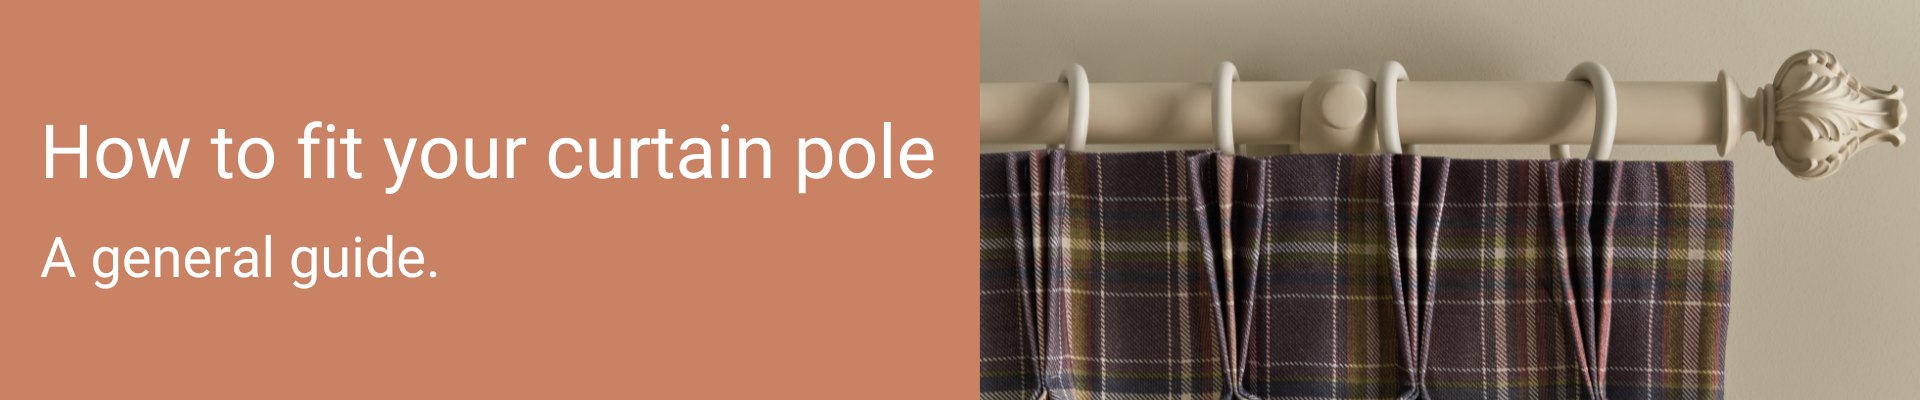 How to fit a curtain pole